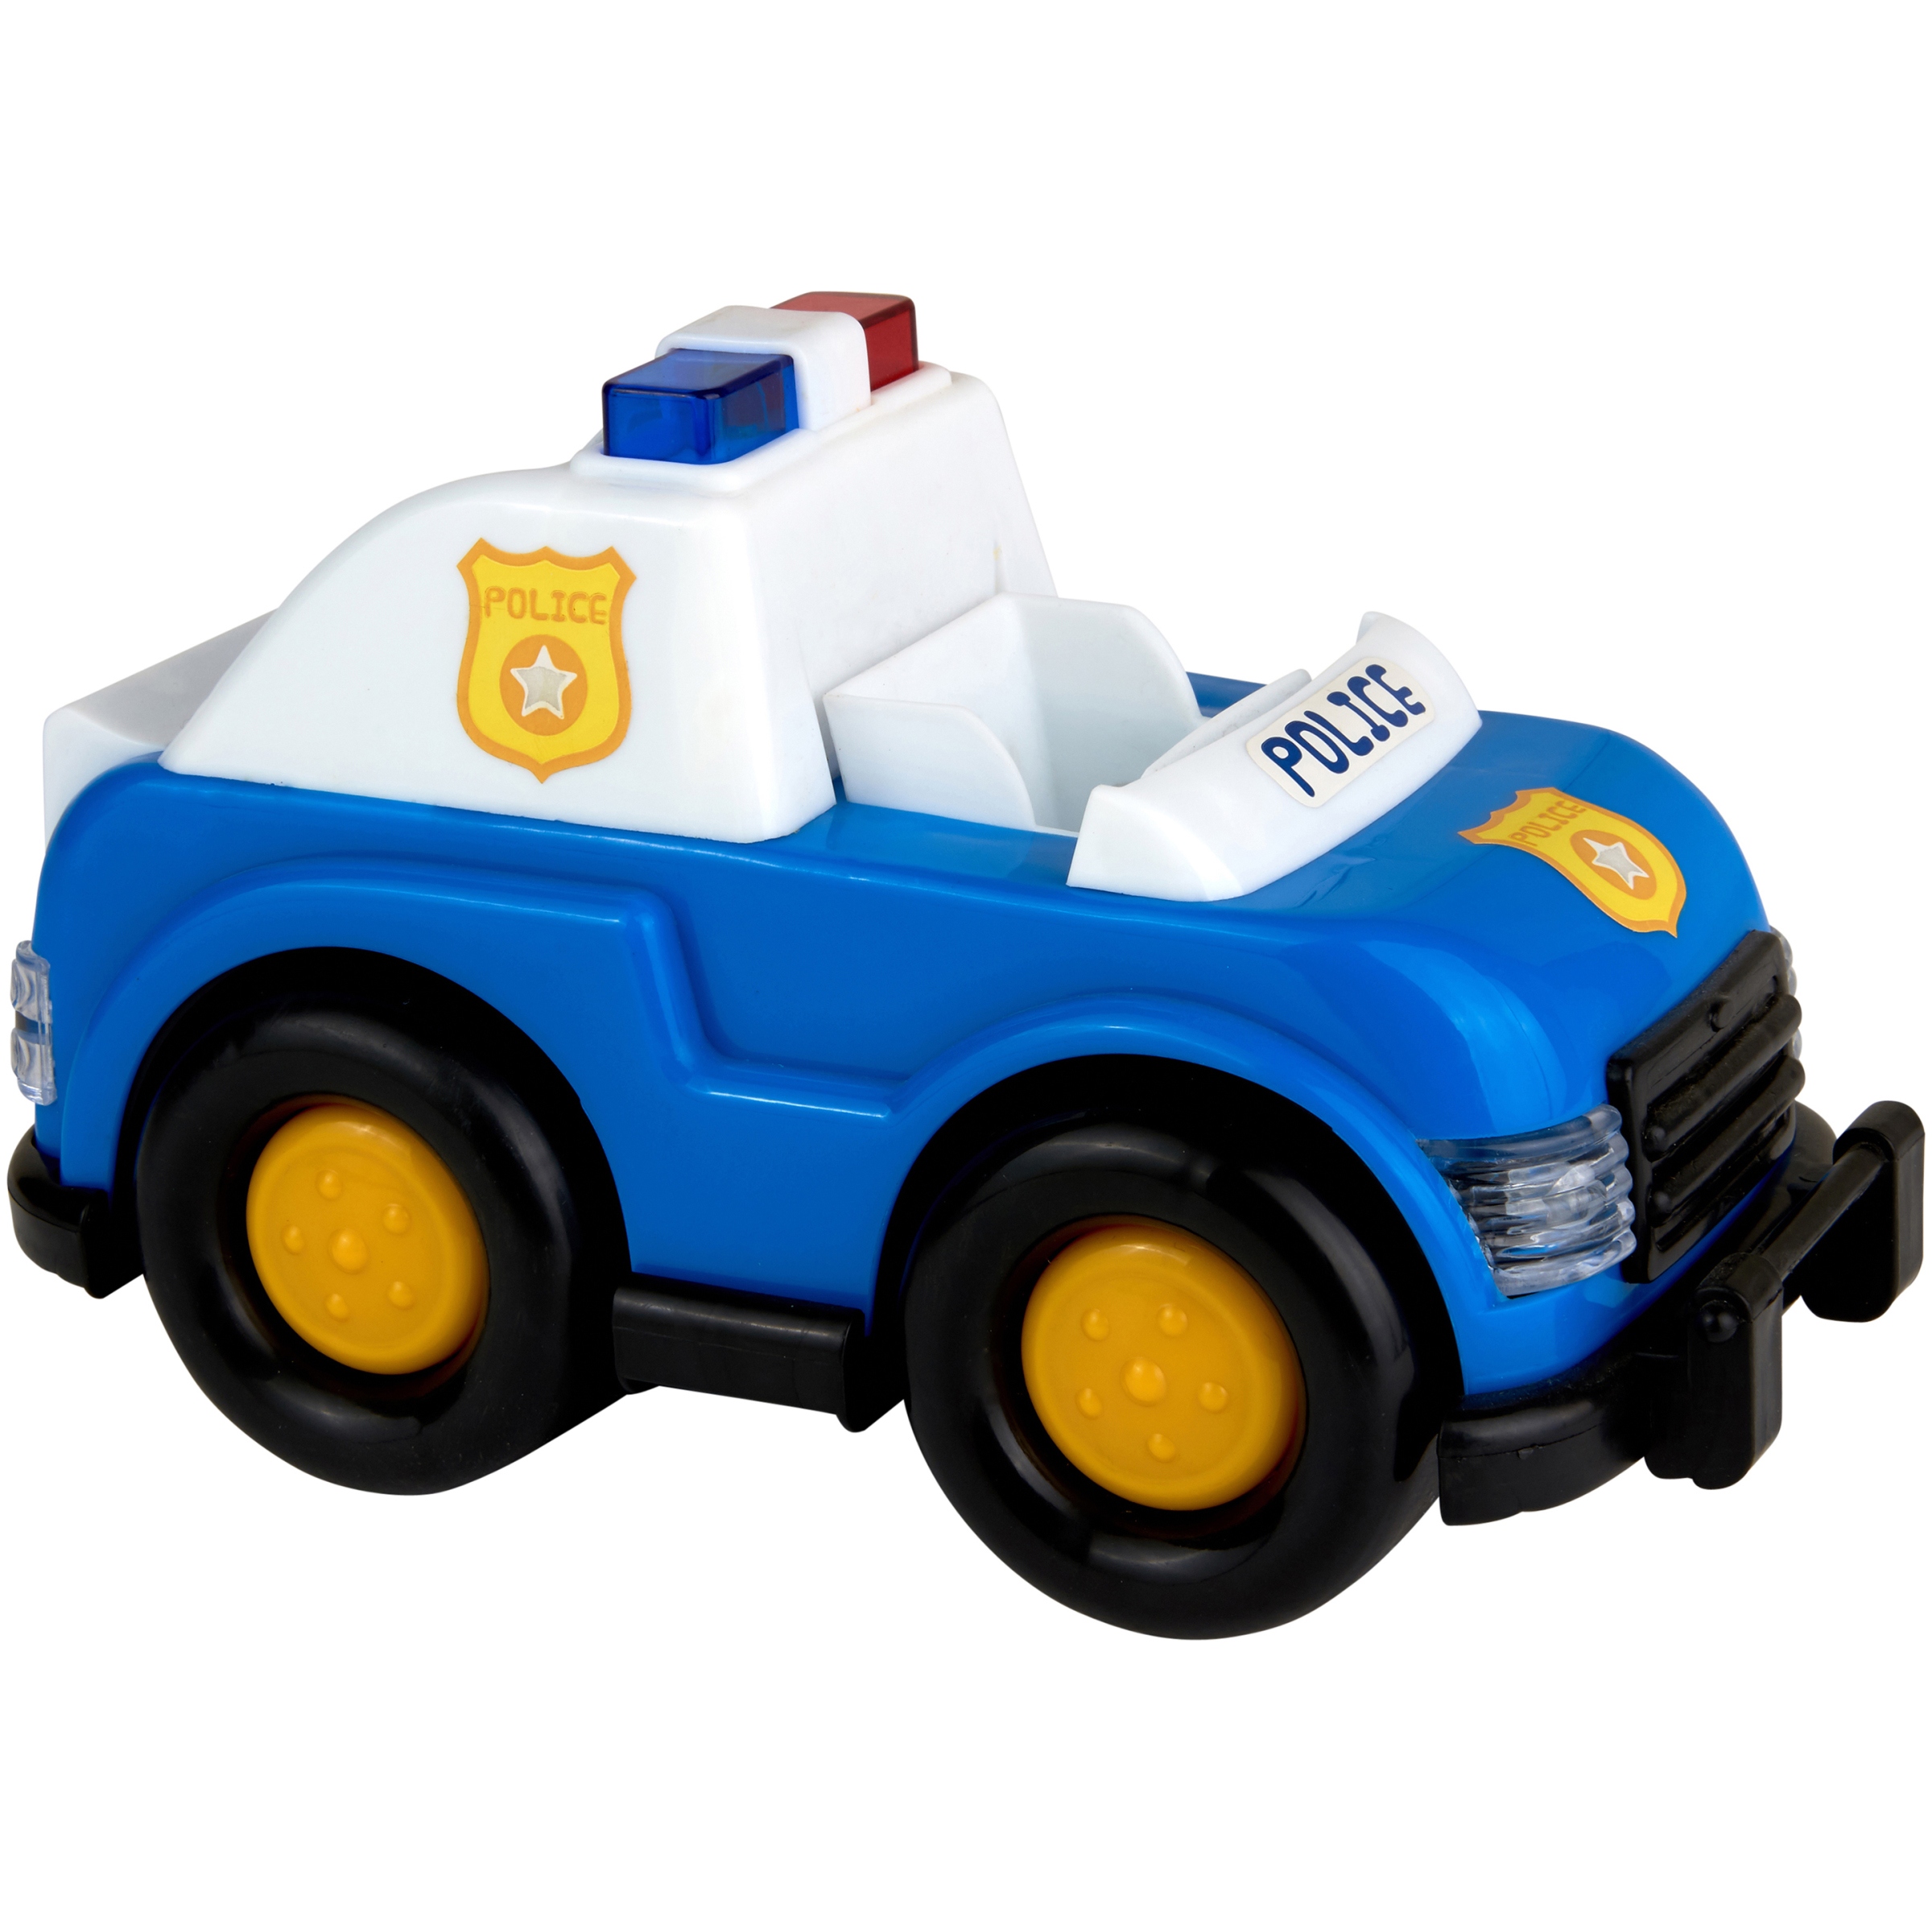 Kid Connection My First Vehicle Toy Car with Action Figure Police Vehicle Playset (2 Pieces) - image 2 of 4